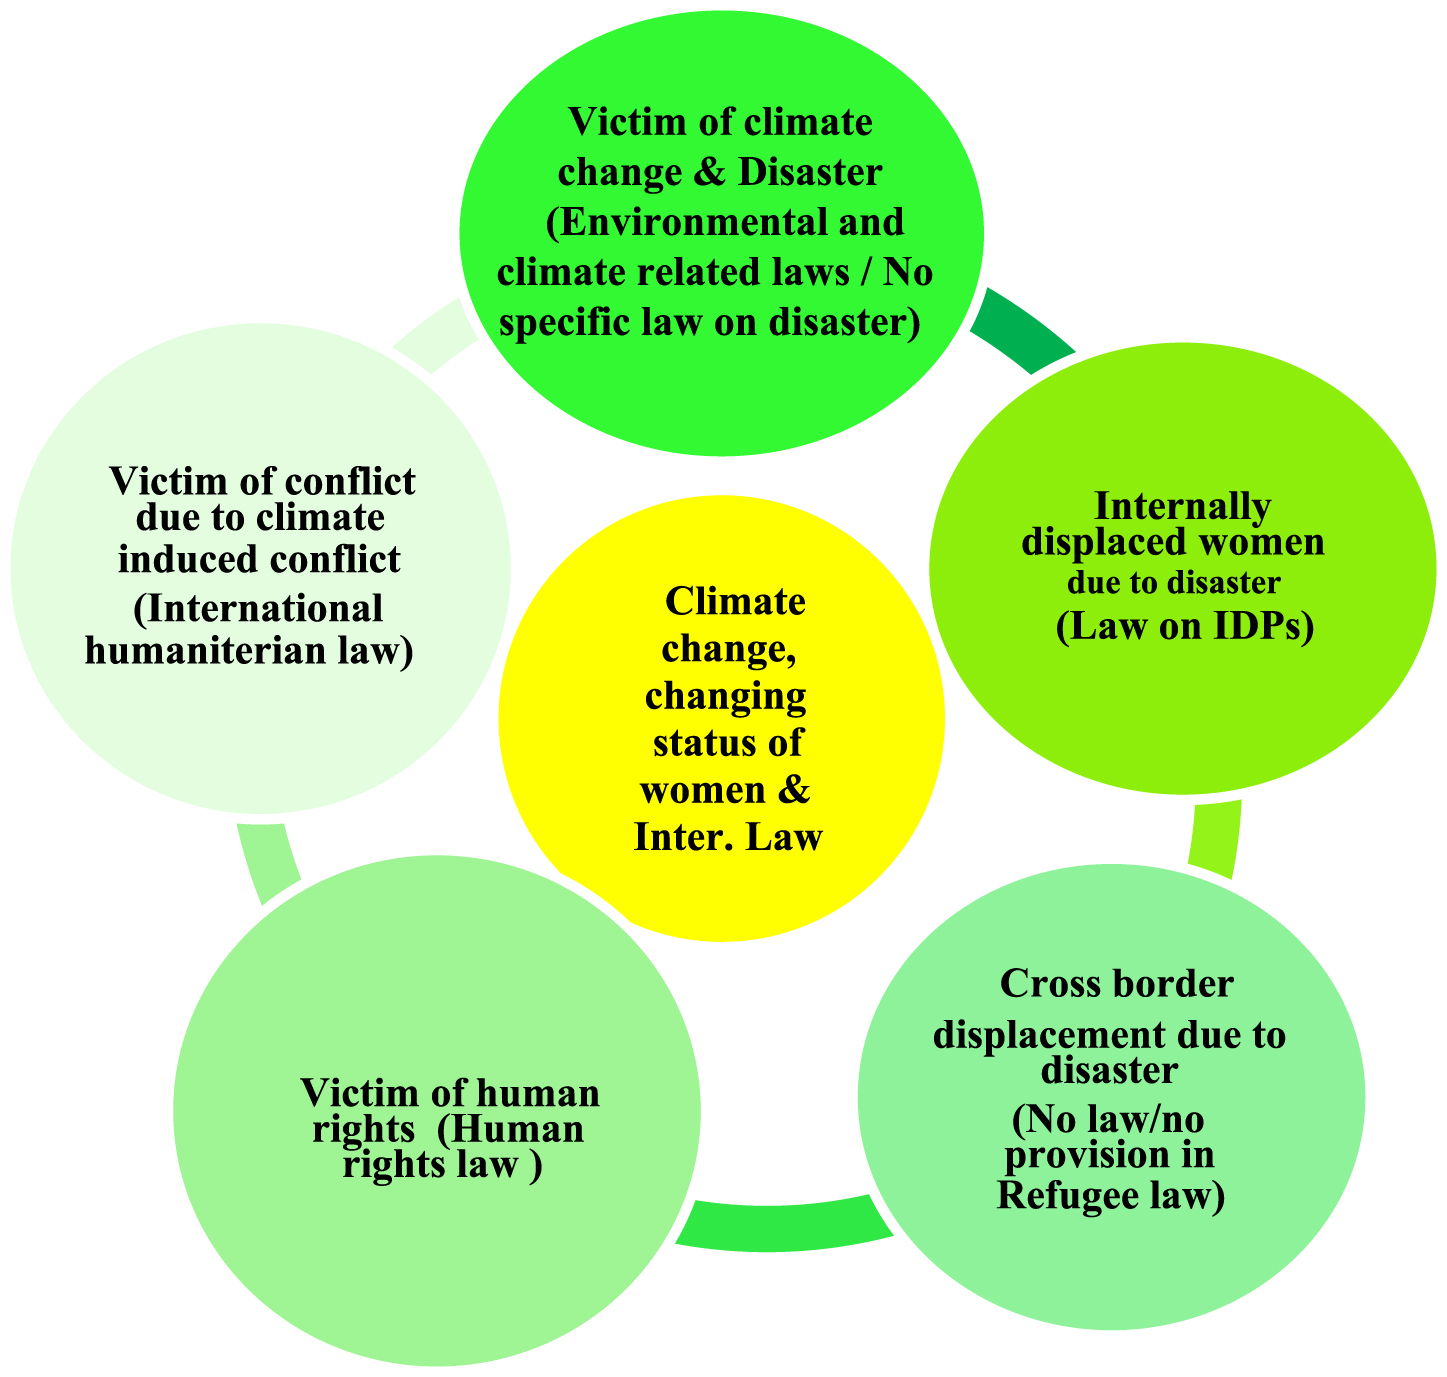 Function of International Law in Climate Change Driven Challenges Affecting Women. Source: By the author.